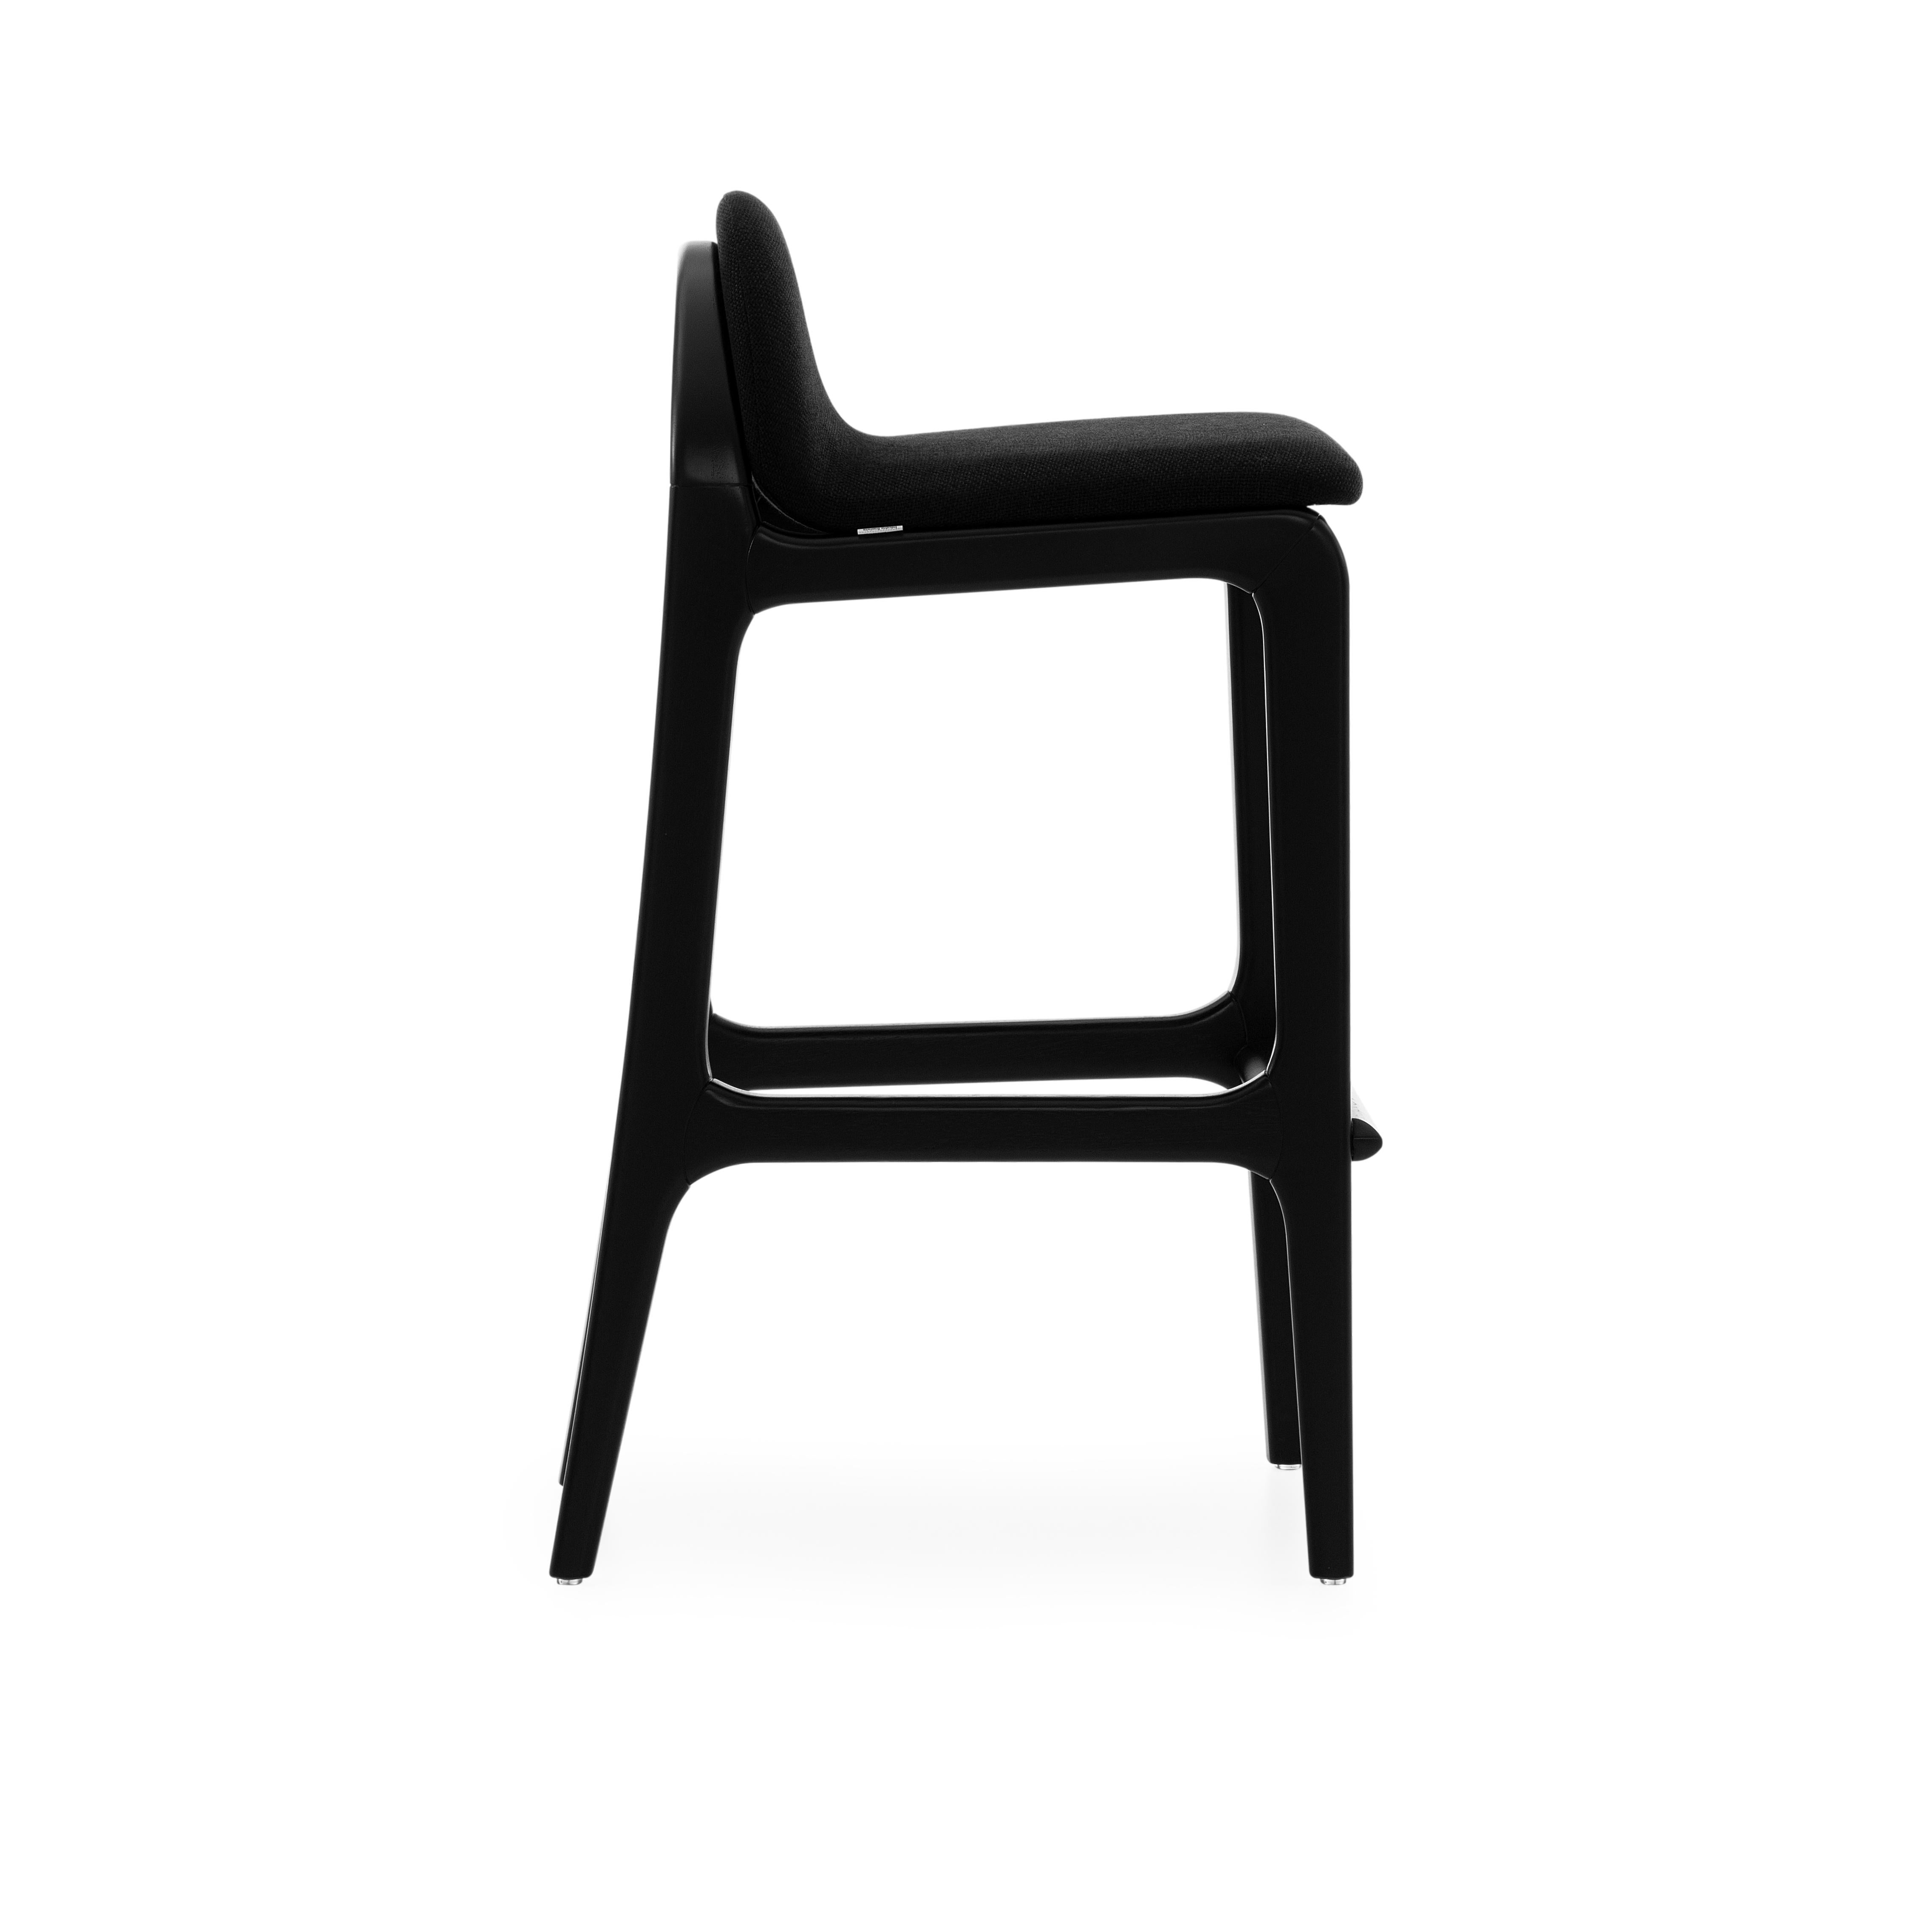 This beautiful Ura counter stool in a black wood base and an upholstered black fabric seat made in Brazil by our team of architects and designers from Uultis Design studio was fabricated with environmentally sustainable materials. It is designed